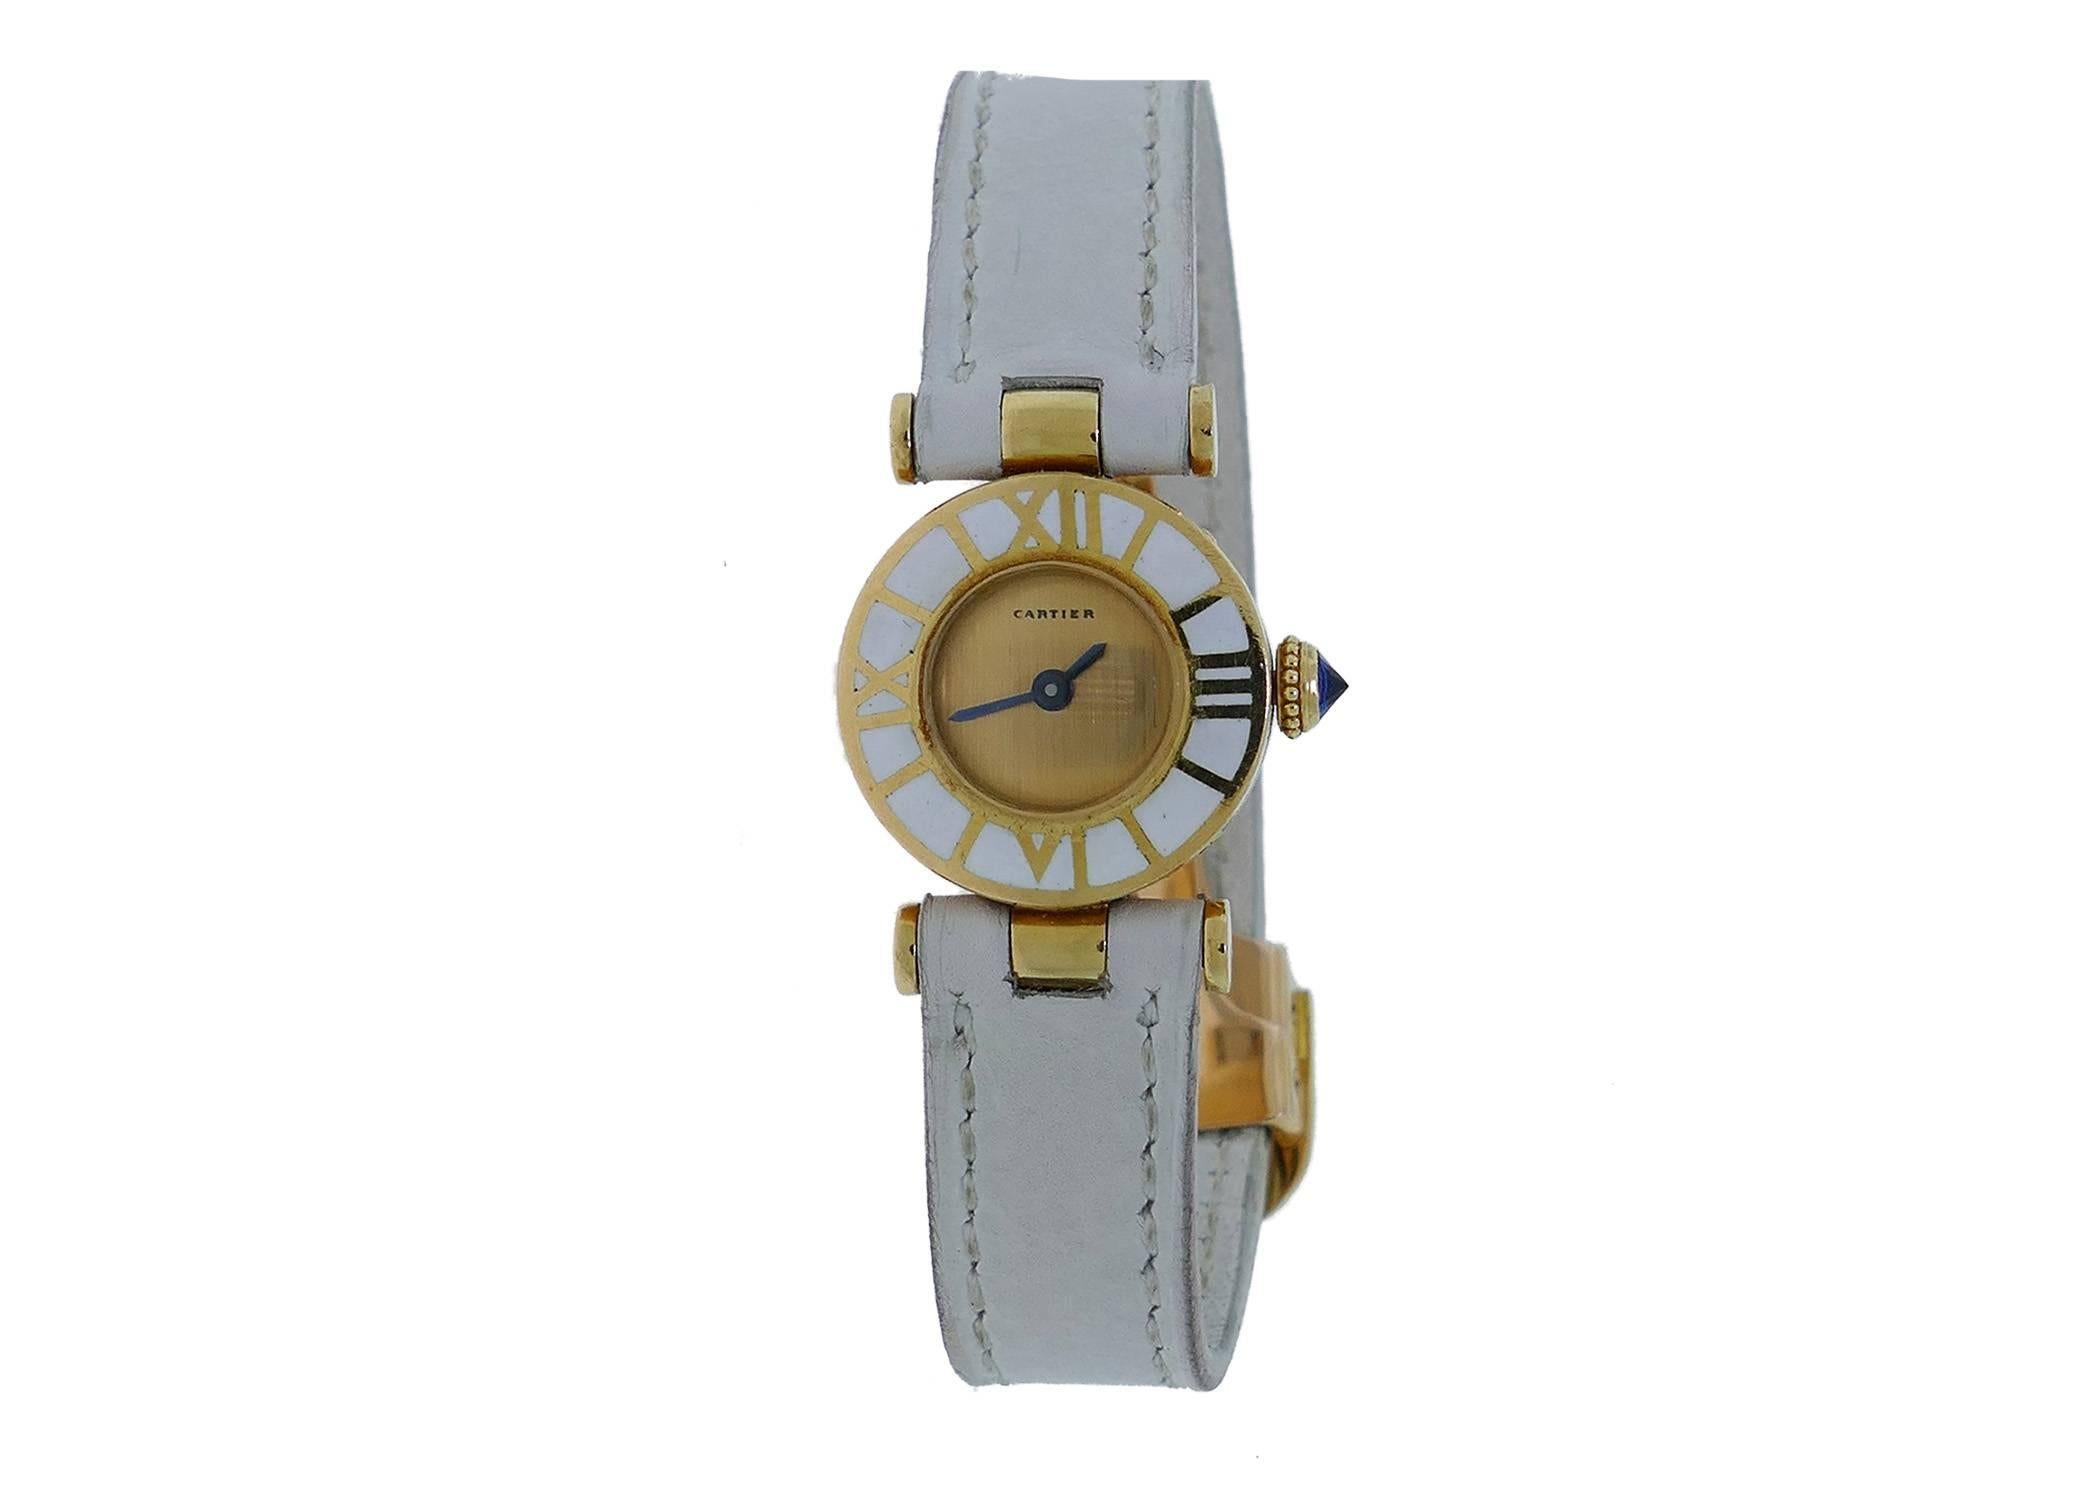 Offered For Sale is a Vintage Ladies (23mm) Cartier 18k Yellow Gold Enamel Watch. The Watch is in Great Condition & Keeping Perfect Time; Movement is Operated by Mechanical Hand Winding. The Watch is on a Cartier Strap & Cartier 18k Deployment